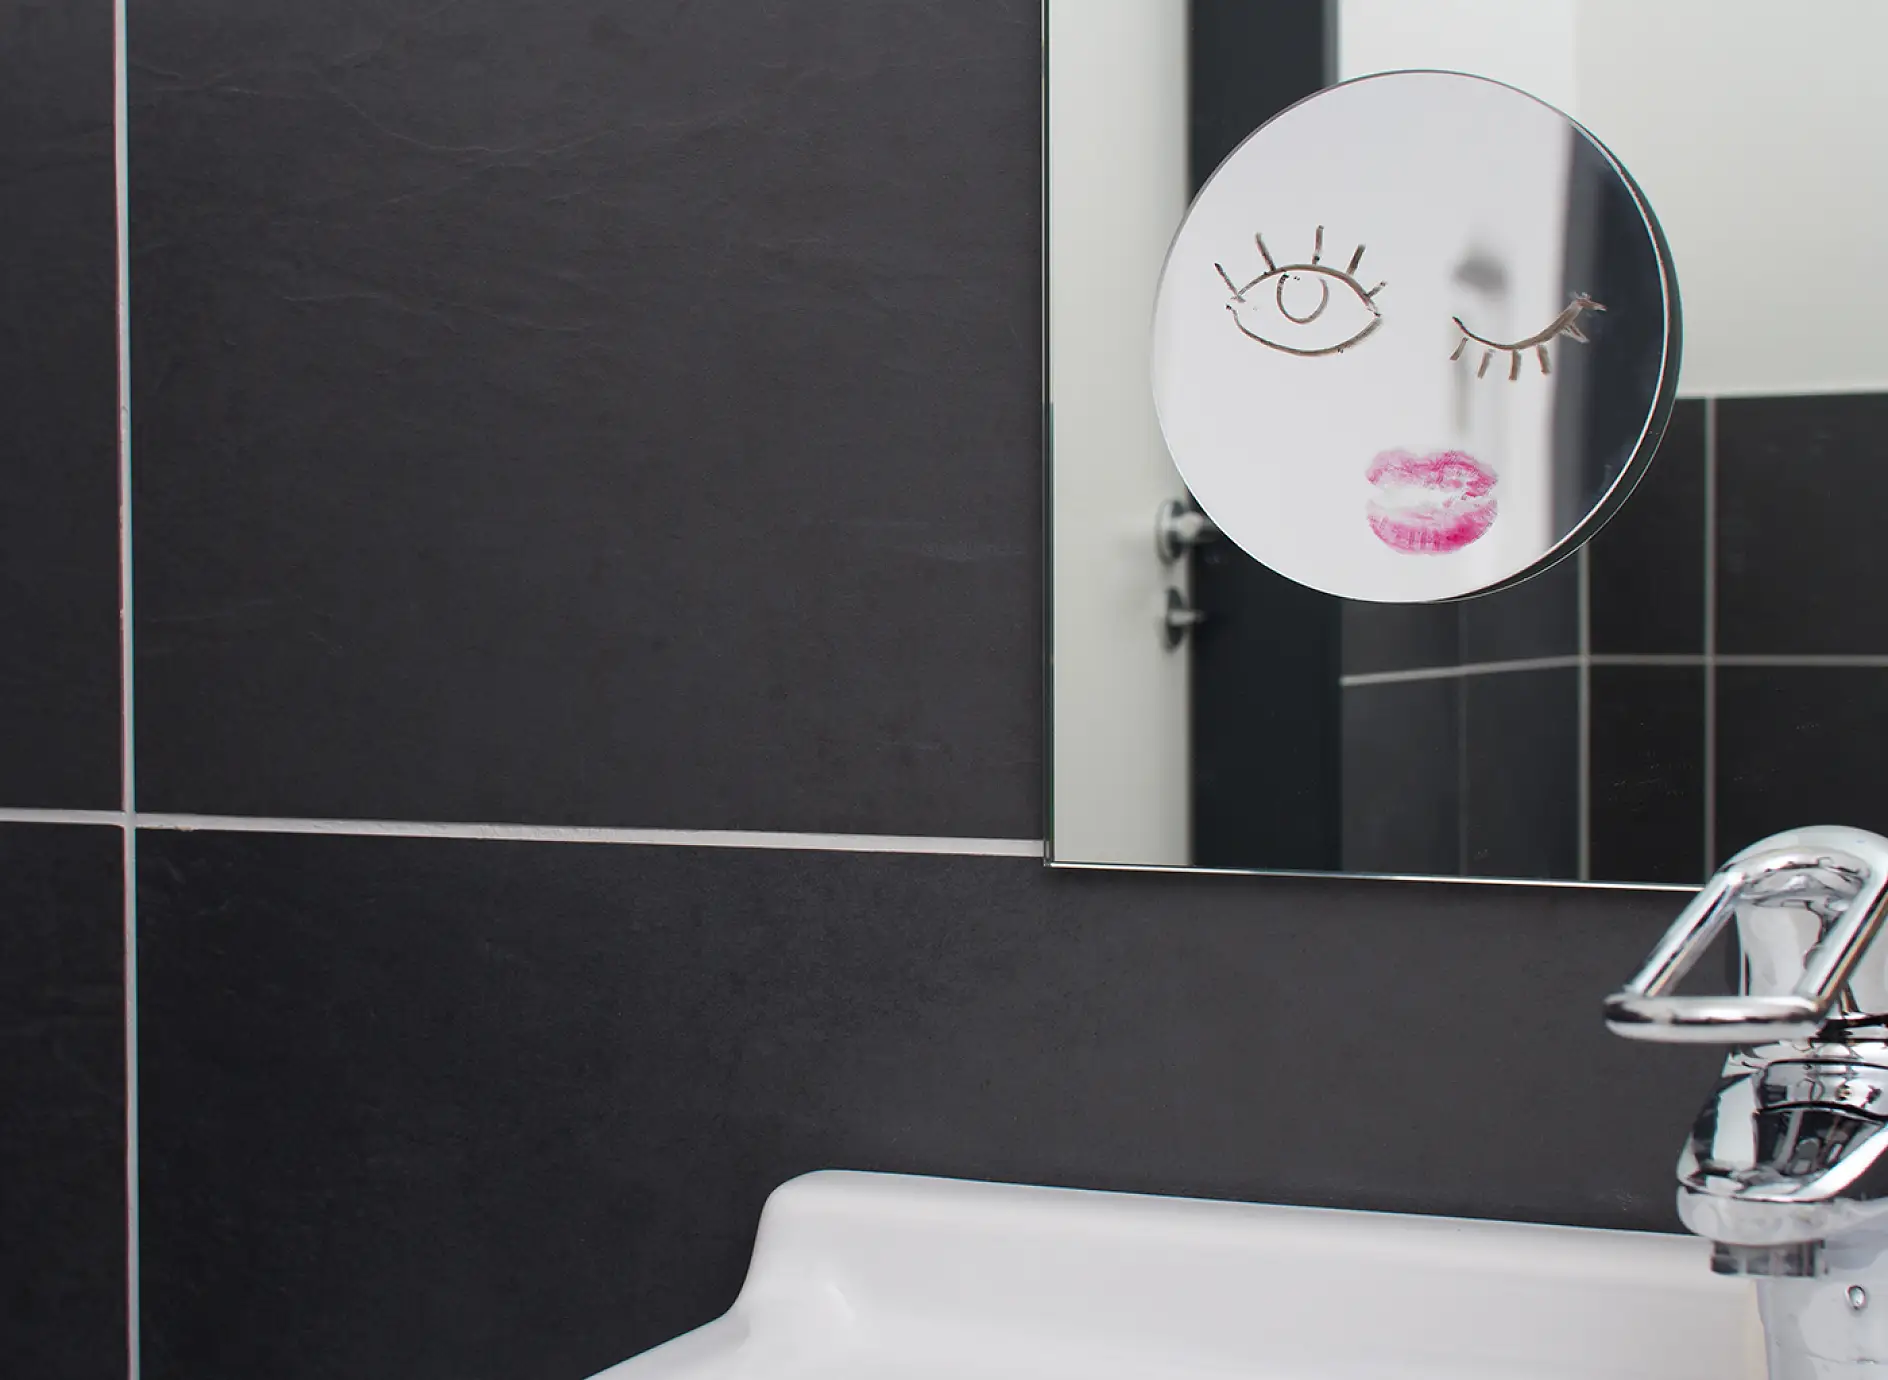 Wall-mounted bathroom mirror with smaller make-up mirror attached.